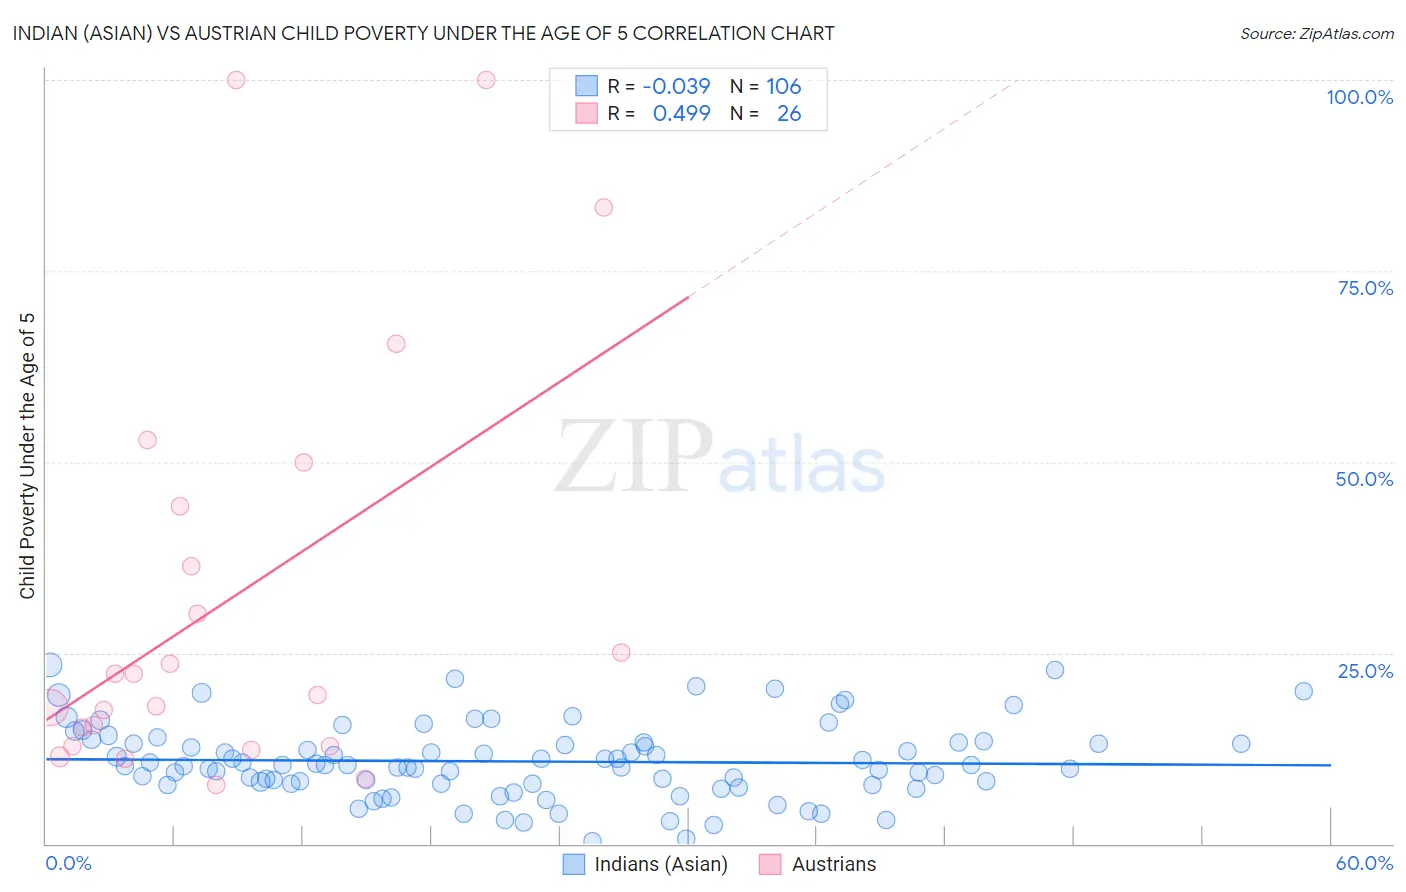 Indian (Asian) vs Austrian Child Poverty Under the Age of 5